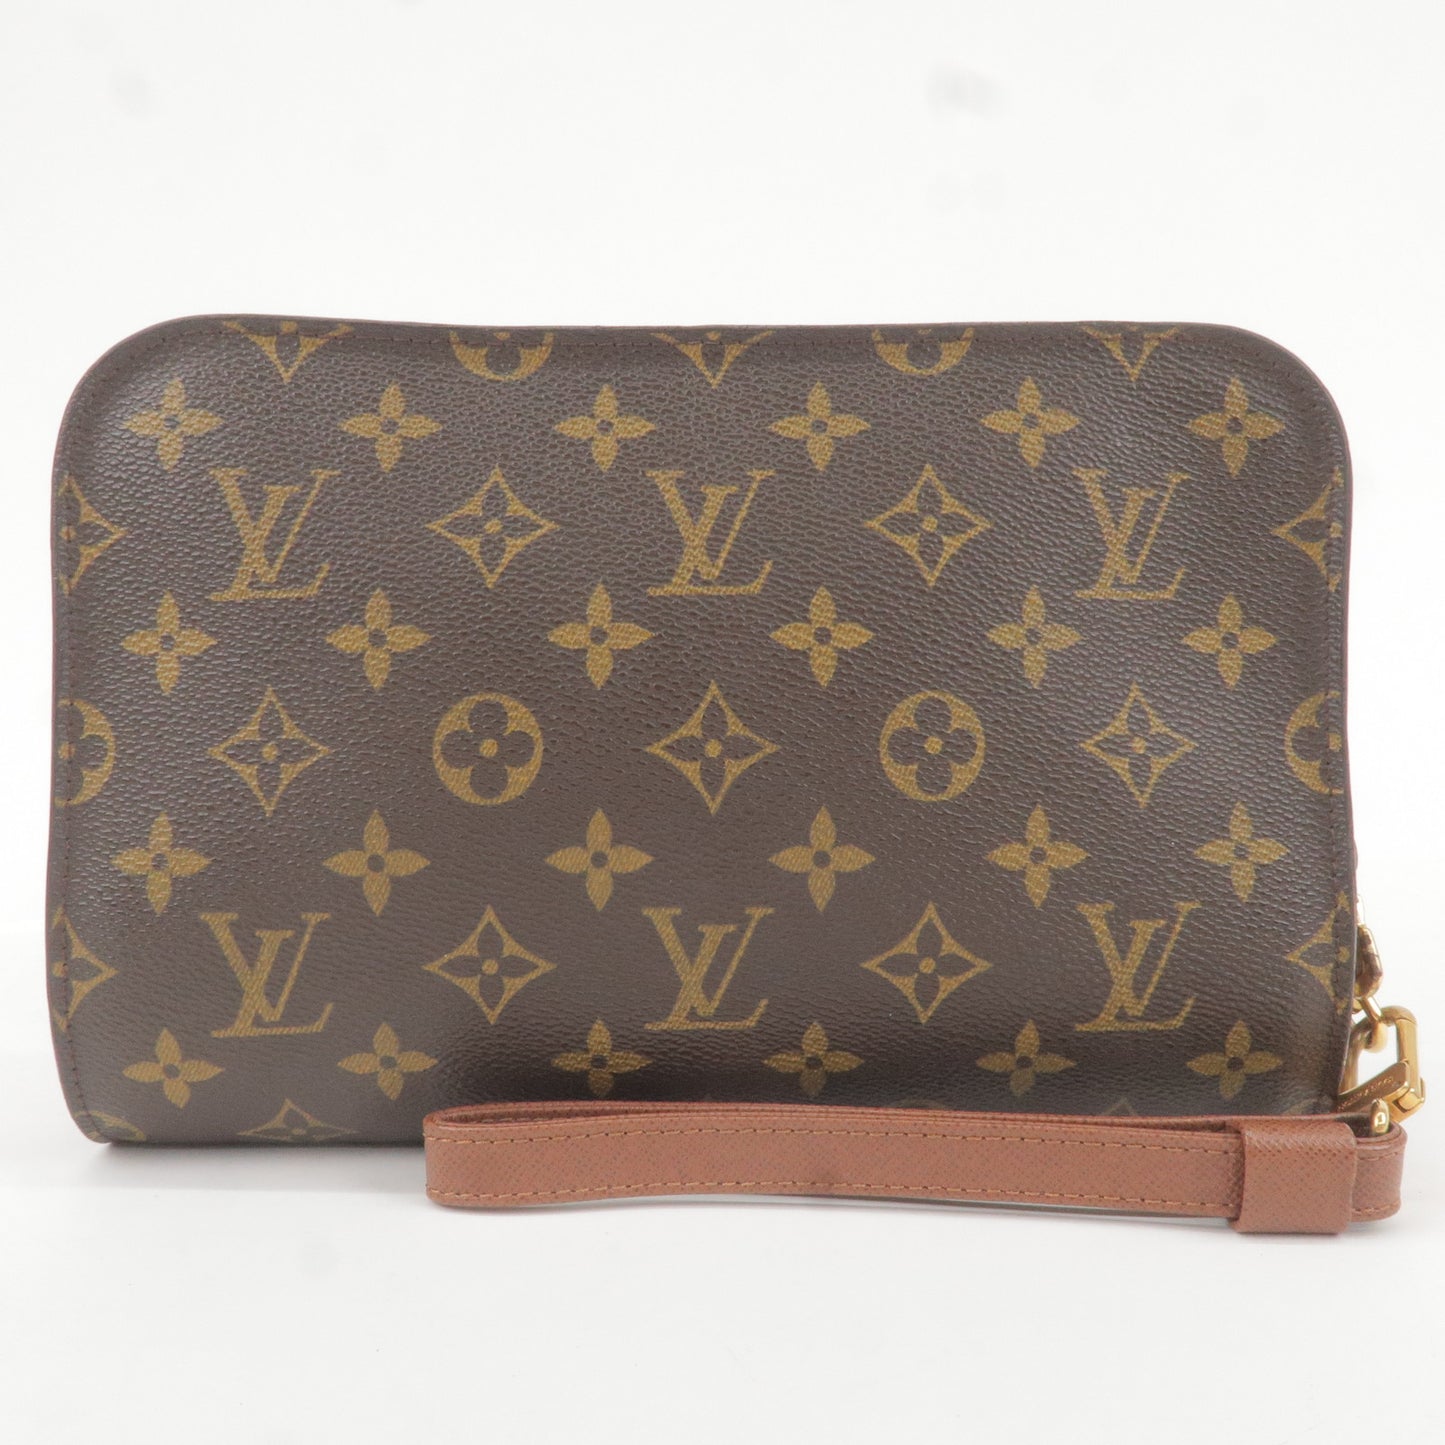 Louis Vuitton 2004 Limited Edition Monogram Cherry Blossom by